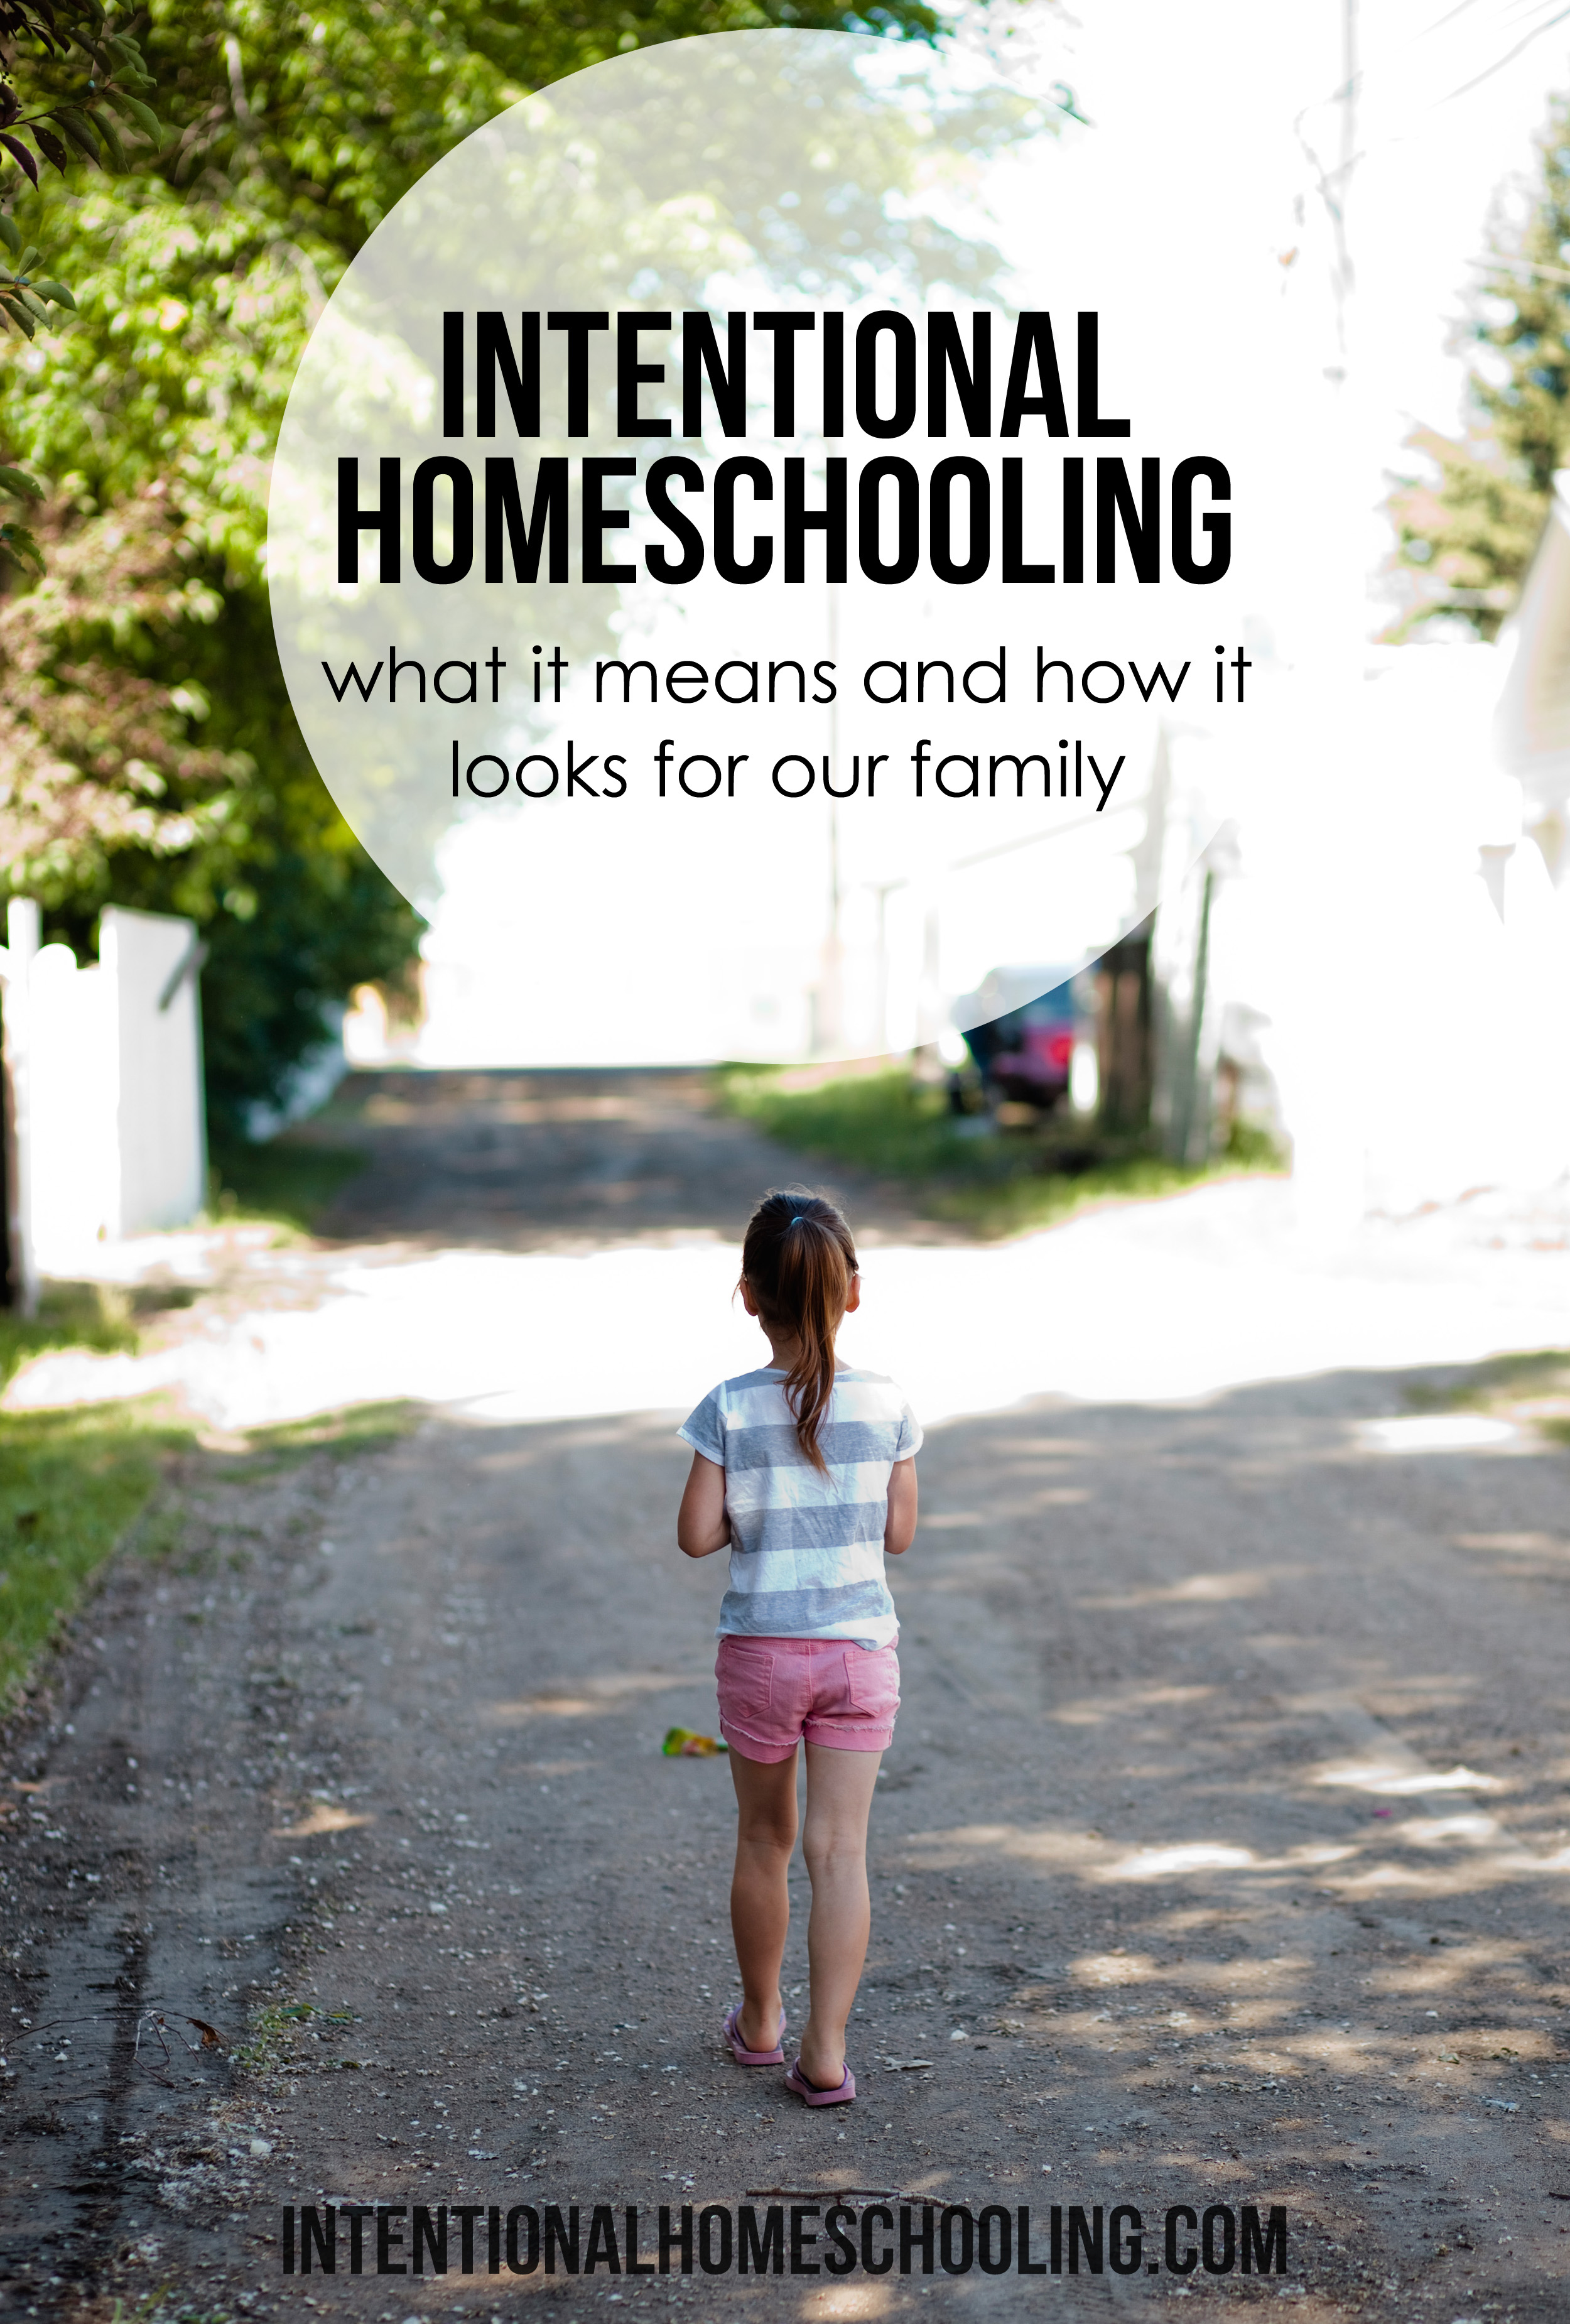 What Intentional Homeschooling means and how it looks for our family.